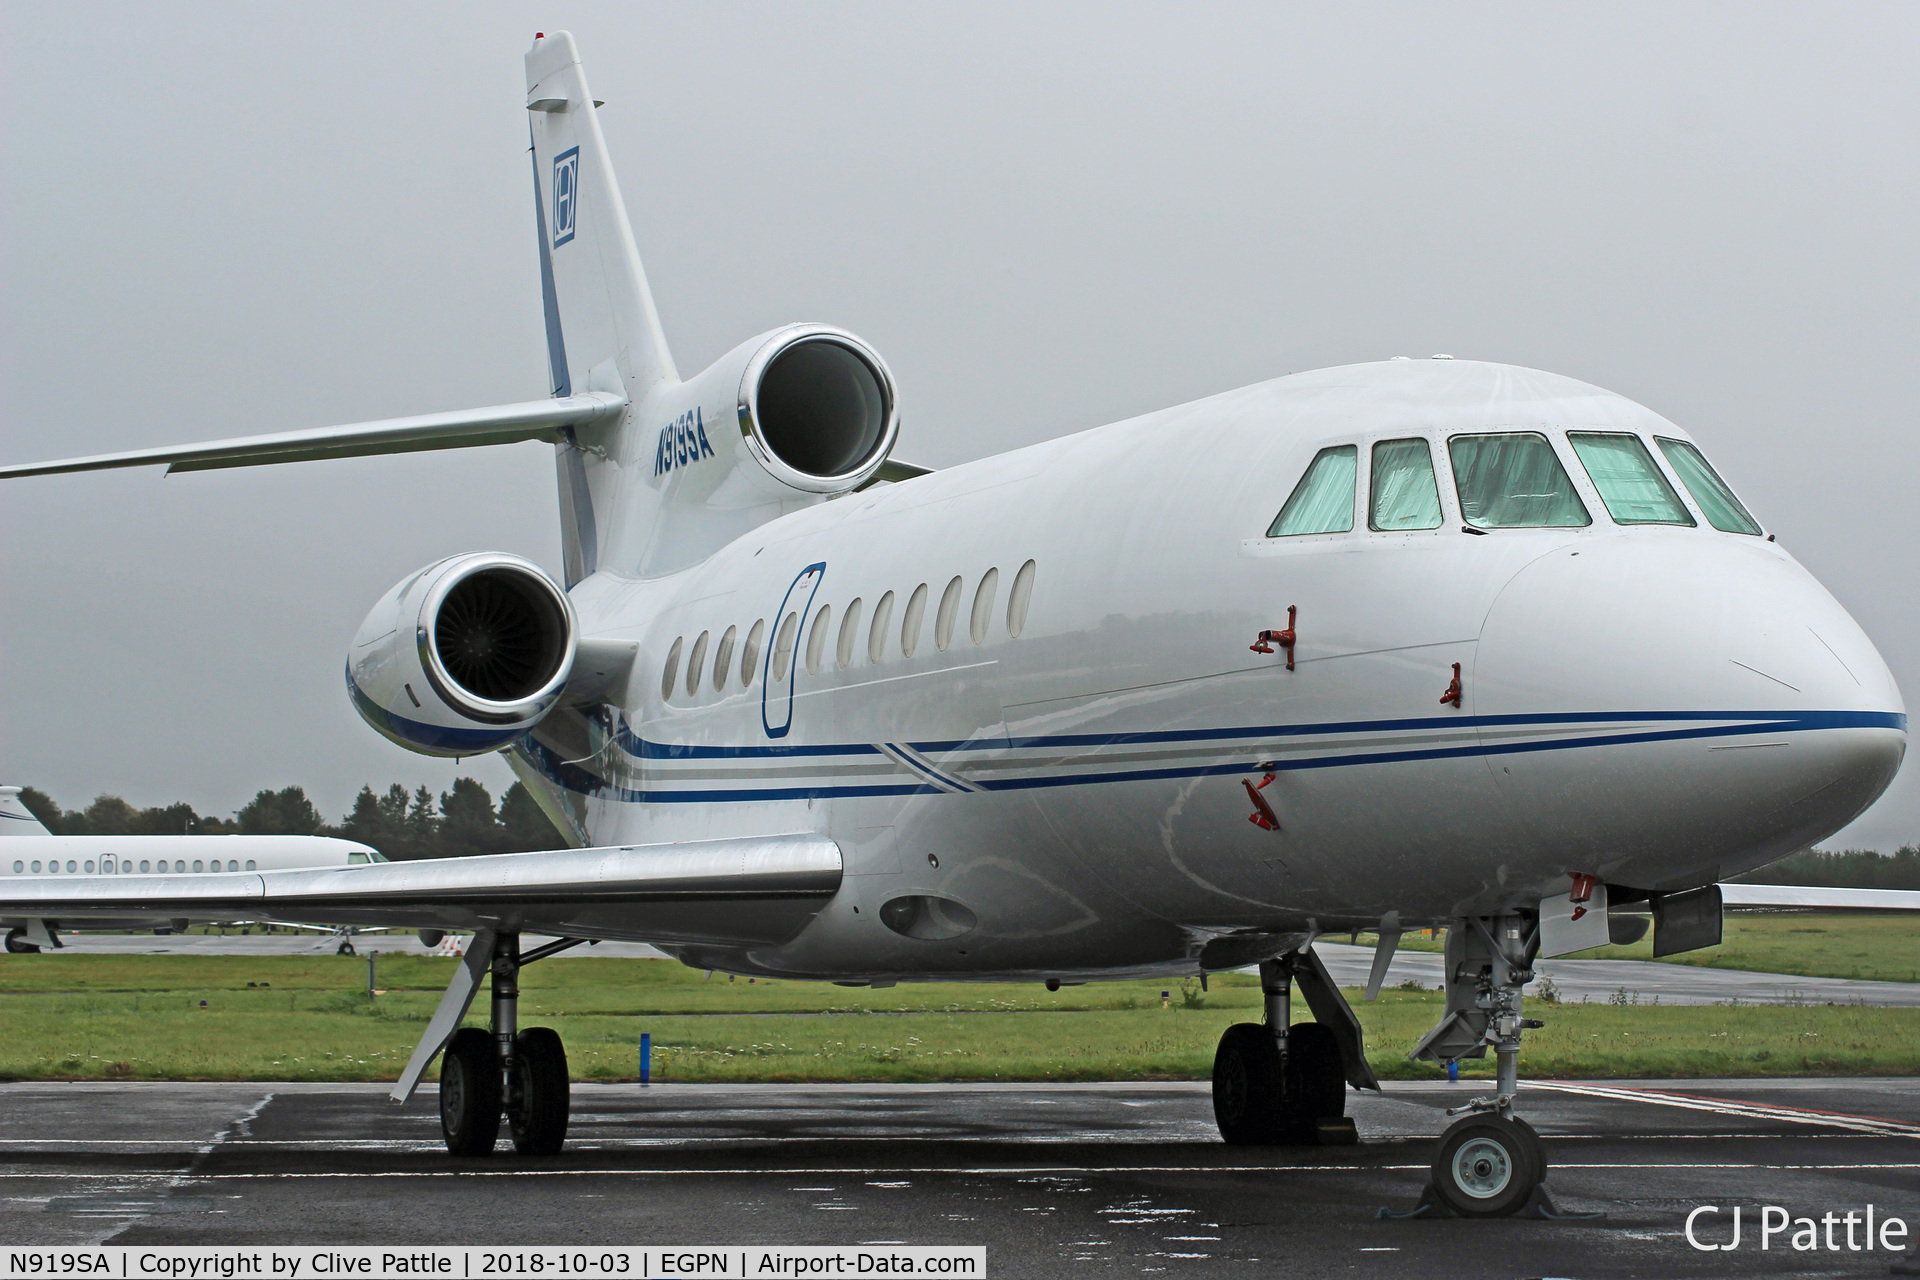 N919SA, 2003 Dassault Falcon 900EX C/N 124, Parked up at Dundee for the annual Dunhill Links Golf Championships at nearby St Andrews.